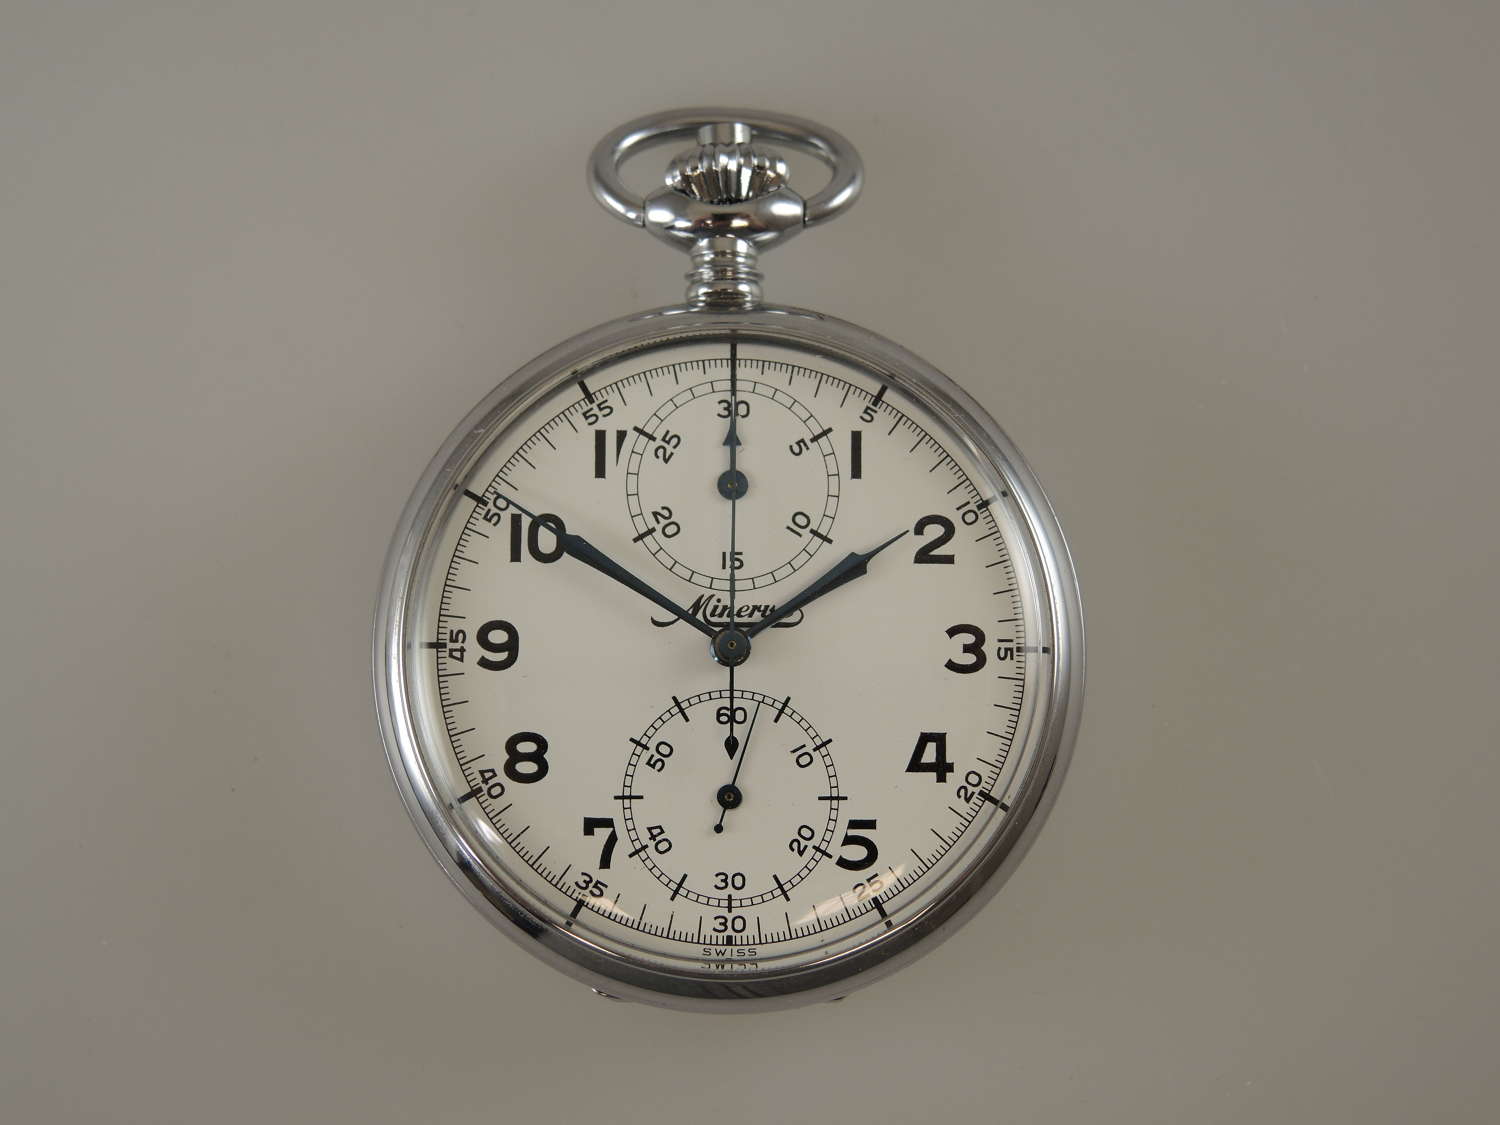 Chronograph pocket watch by Minerva in unused condition c1940